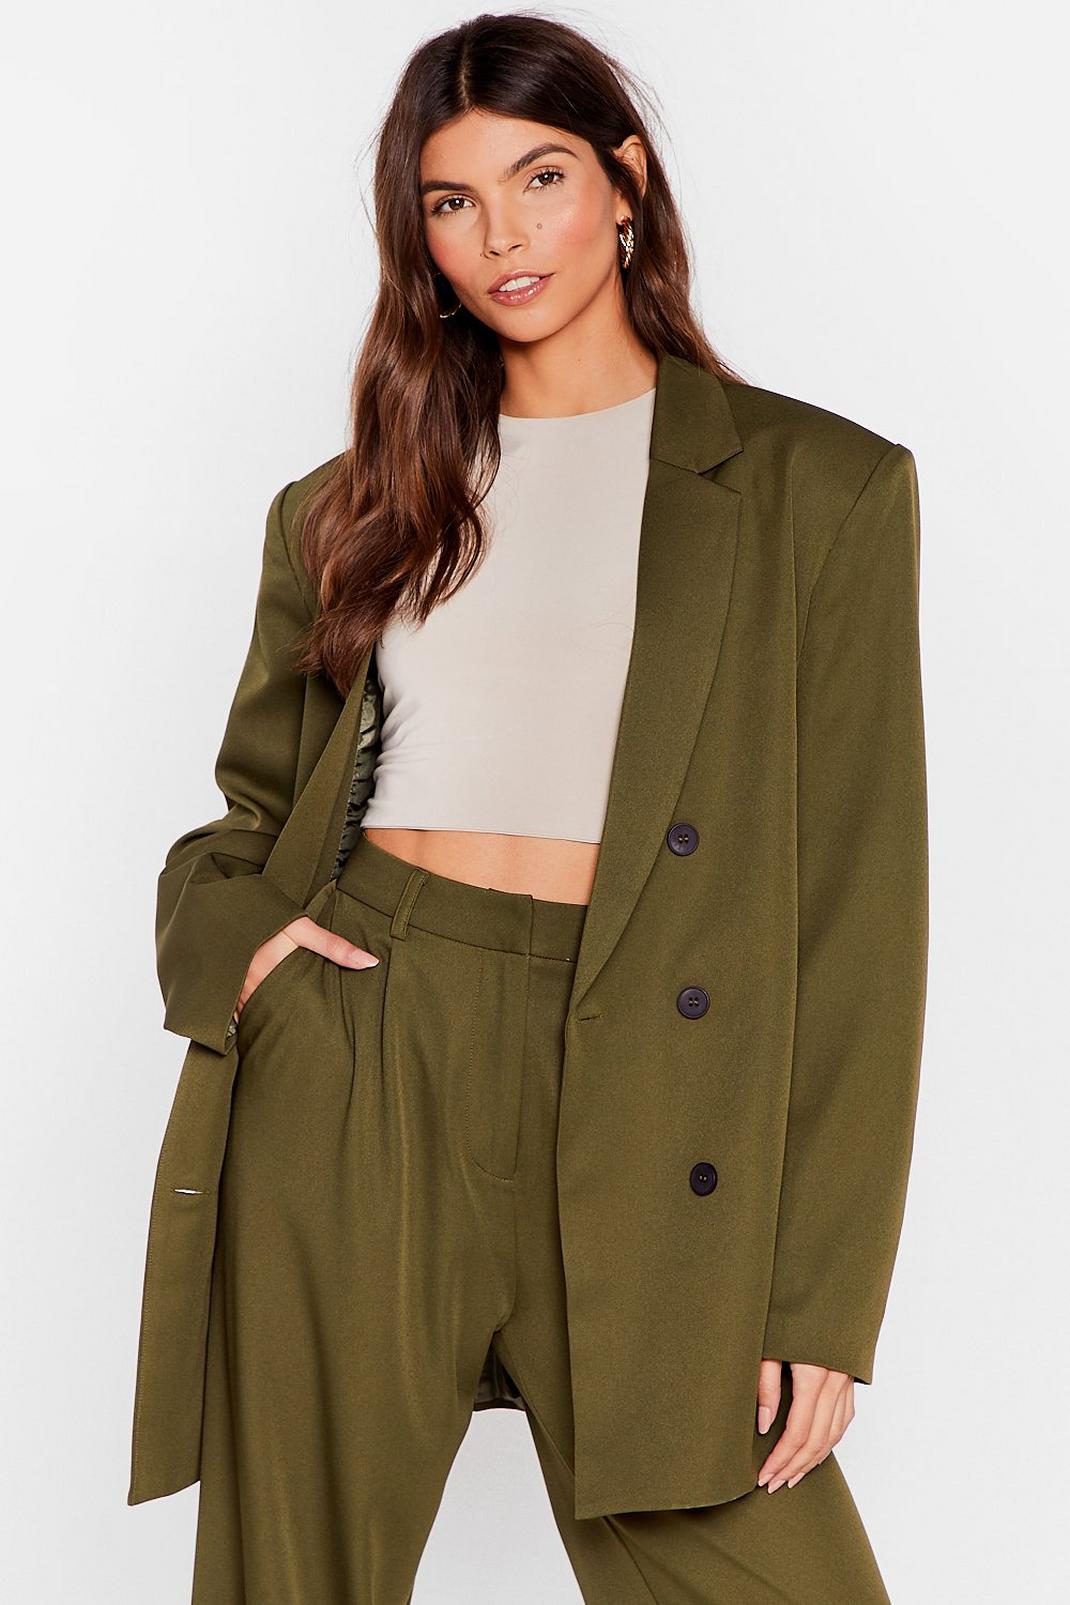 Olive Sorry We're Working Late Oversized Blazer image number 1